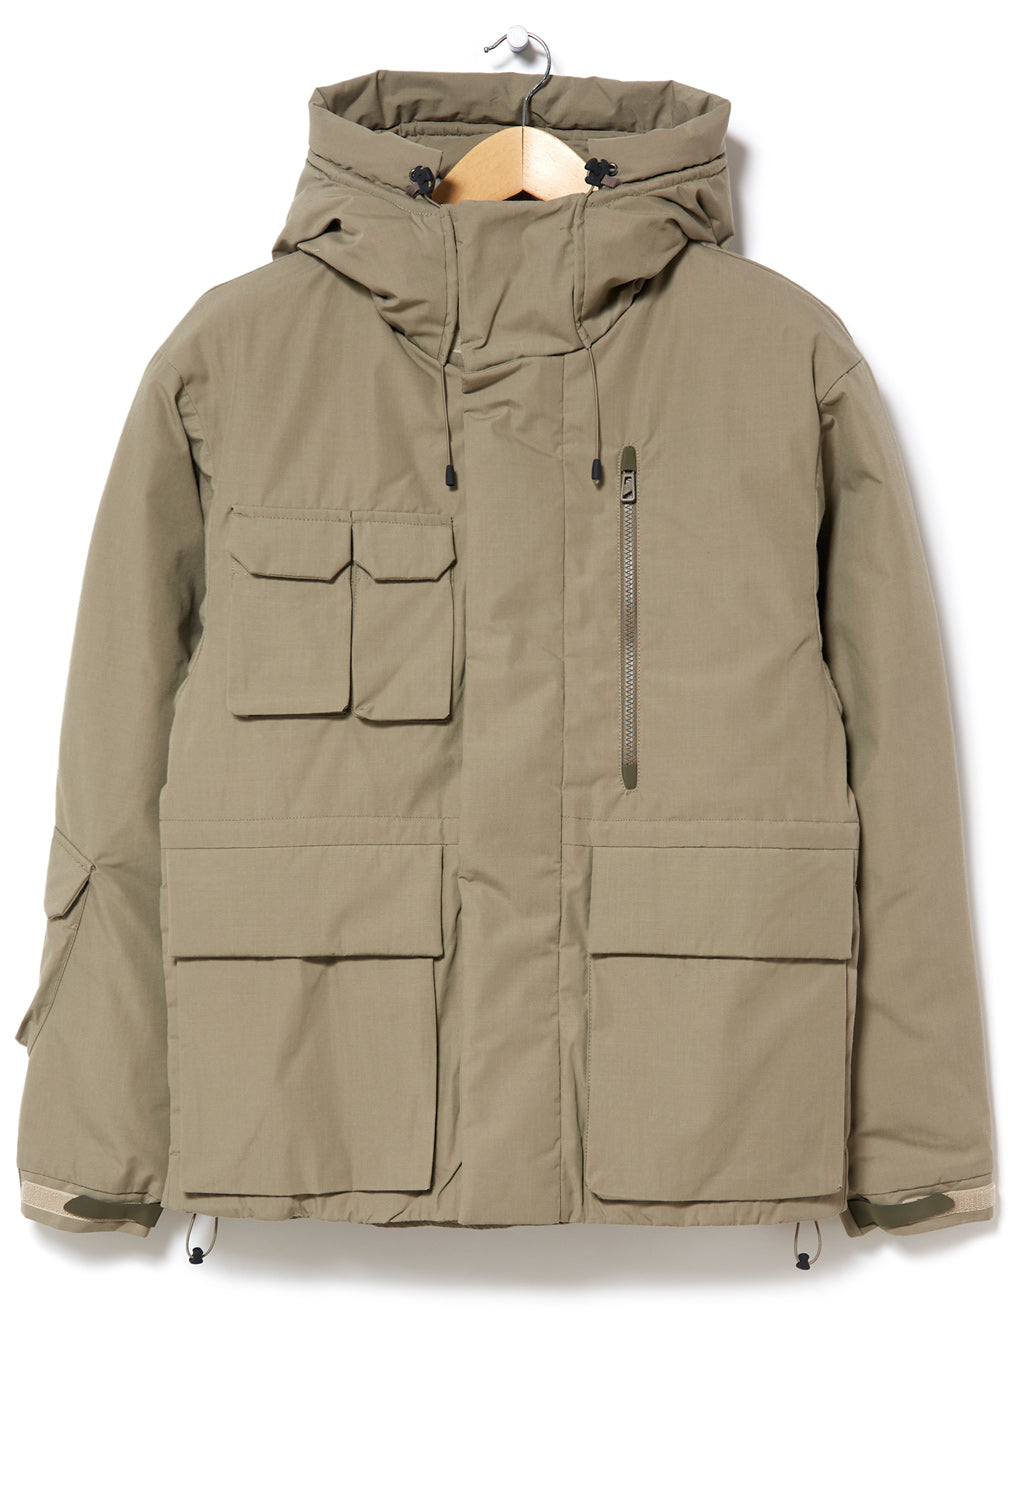 Gramicci x F/CE Men's Insulation Jacket - Sage Green – Outsiders Store UK